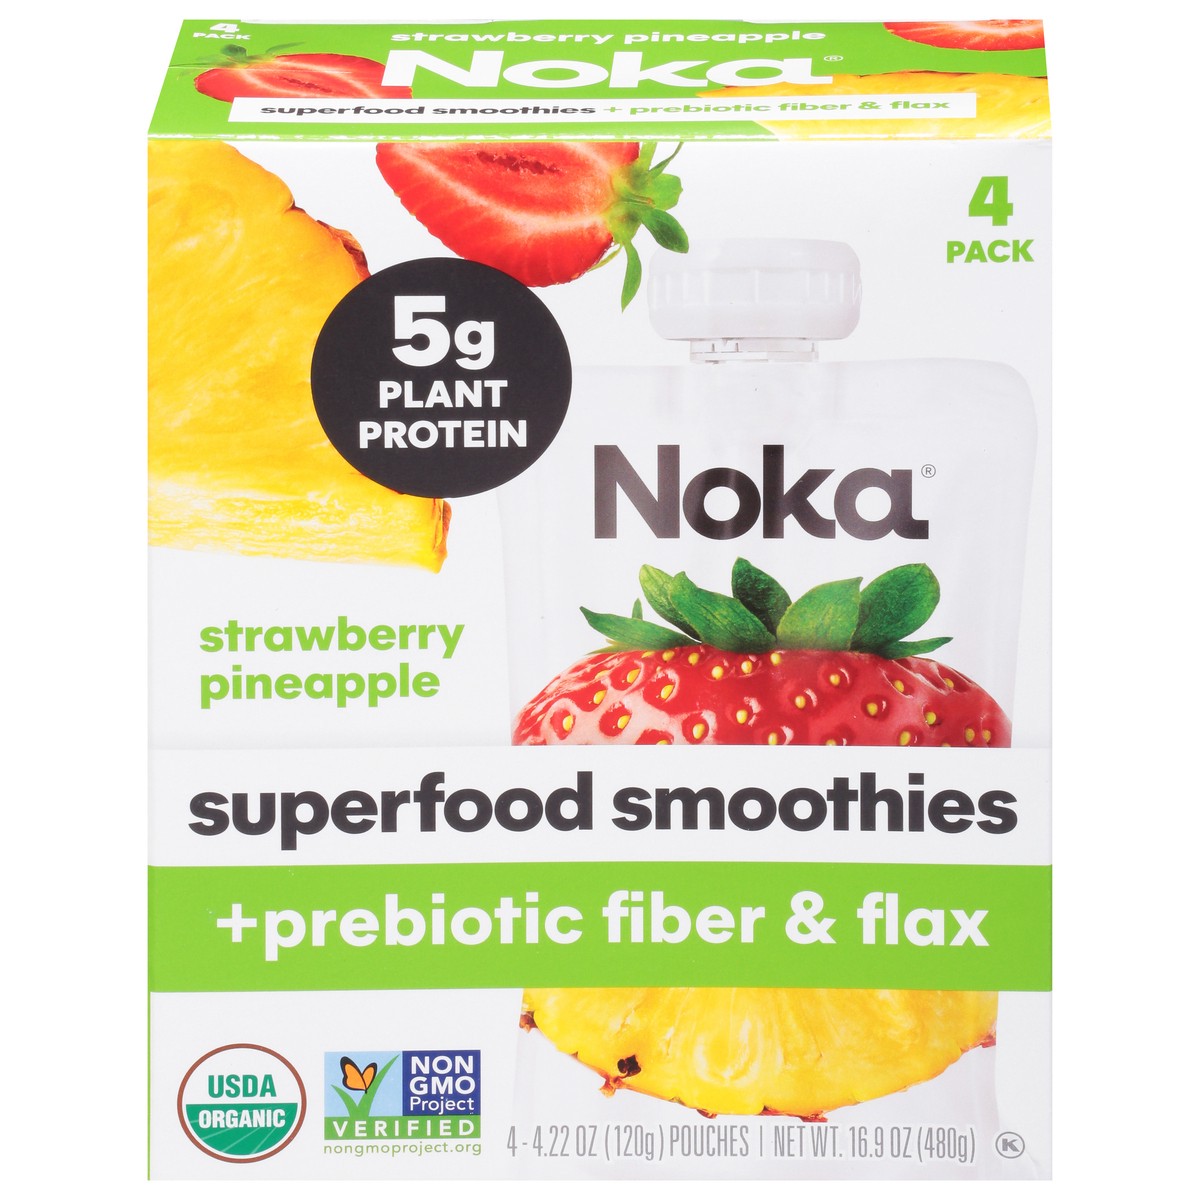 slide 14 of 14, NOKA 4 Pack Strawberry Pineapple Superfood Smoothies 4 - 4.22 oz Pouches, 4 ct